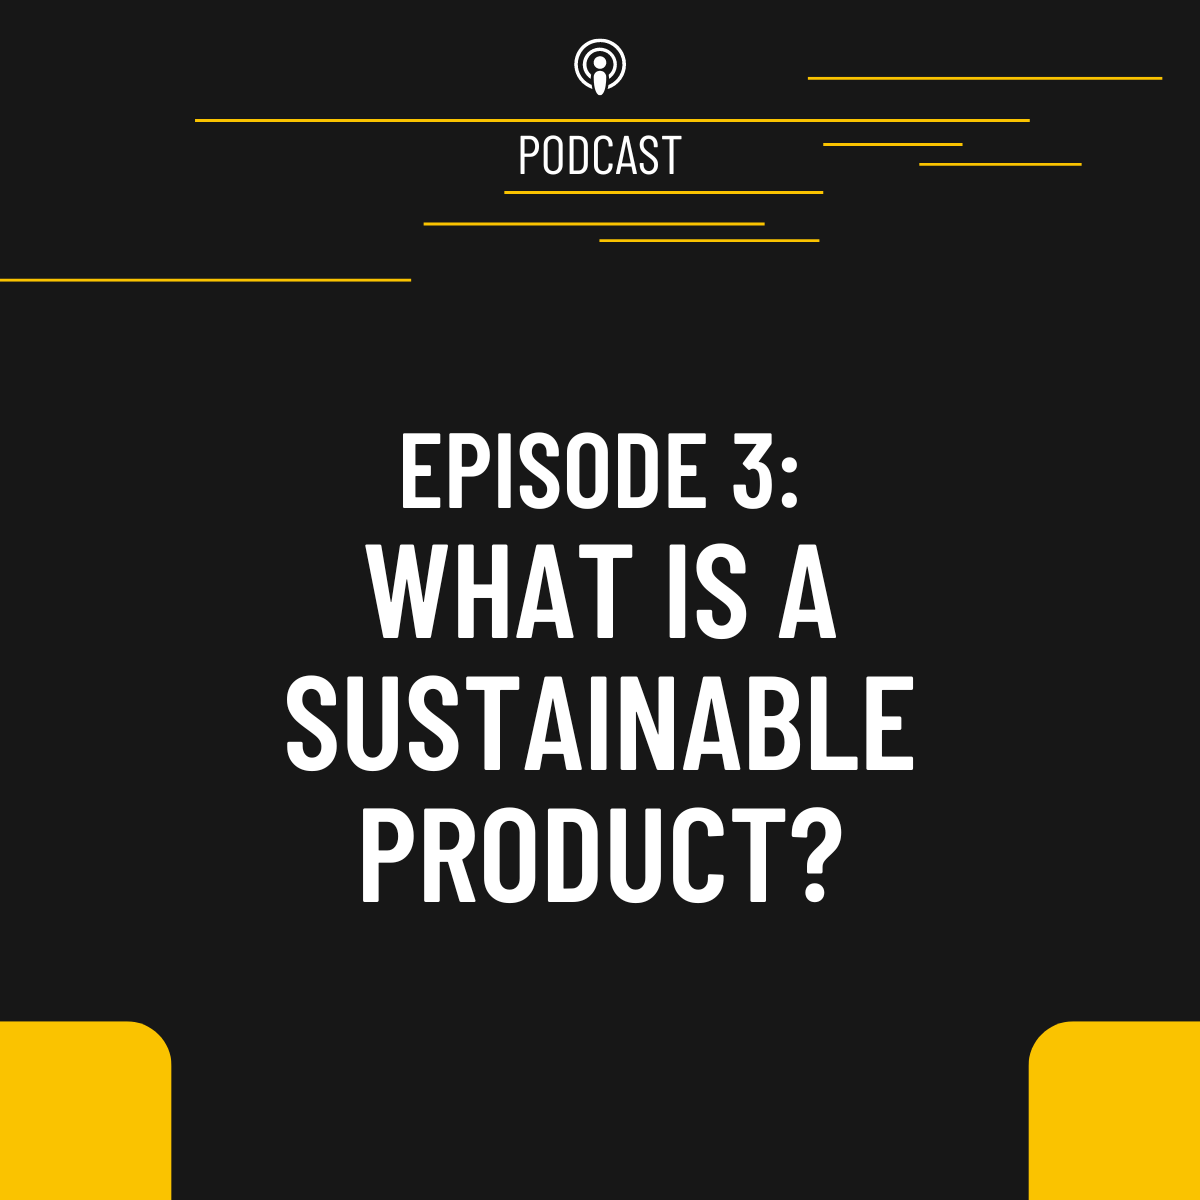 What is a sustainable product?